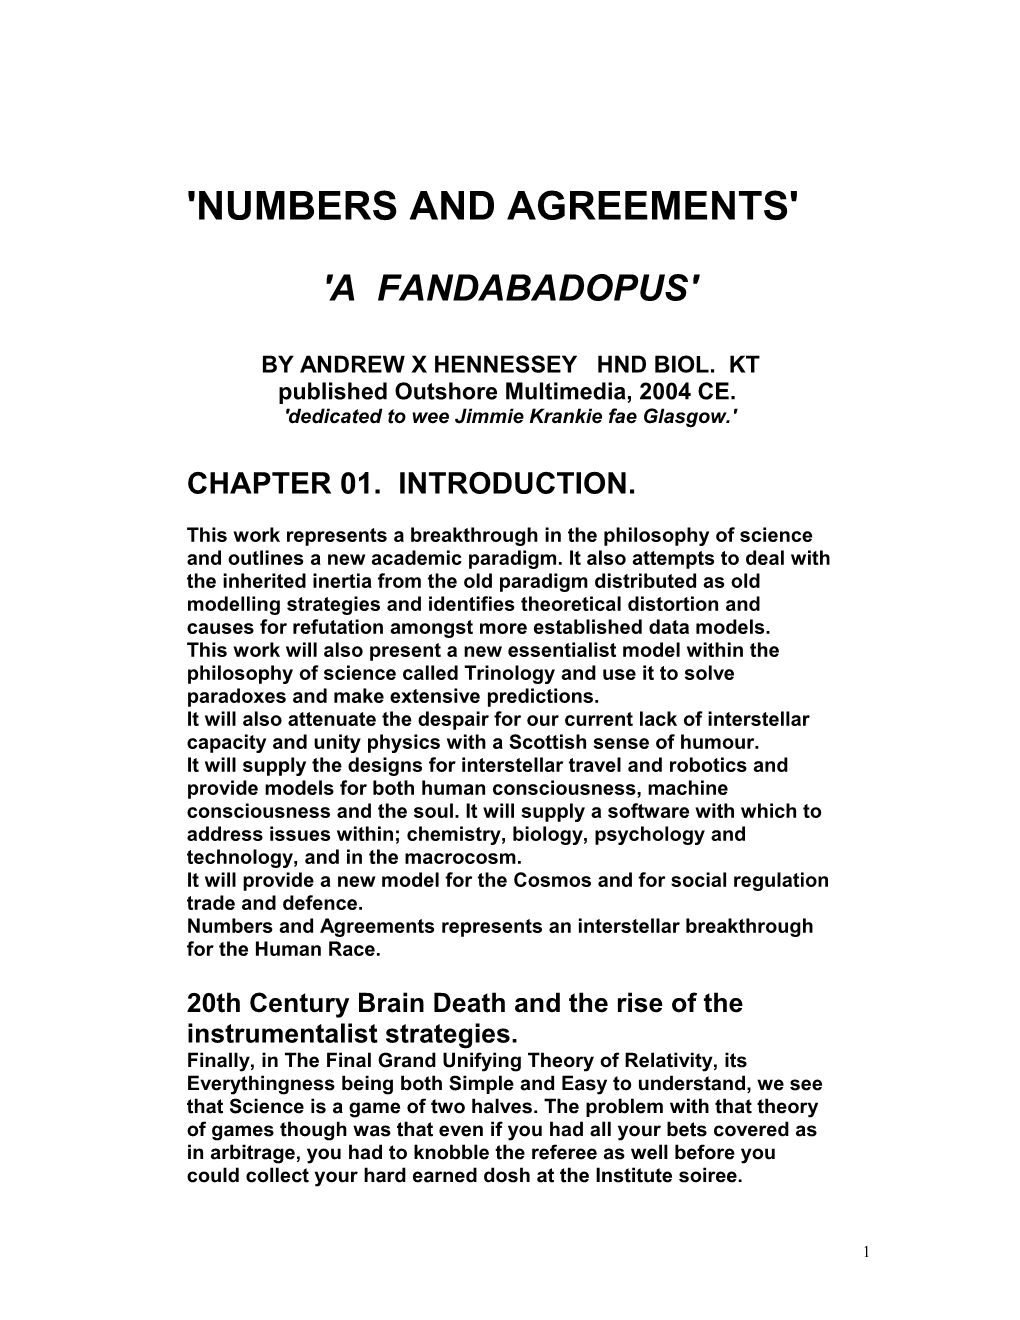 Numbers and Agreements